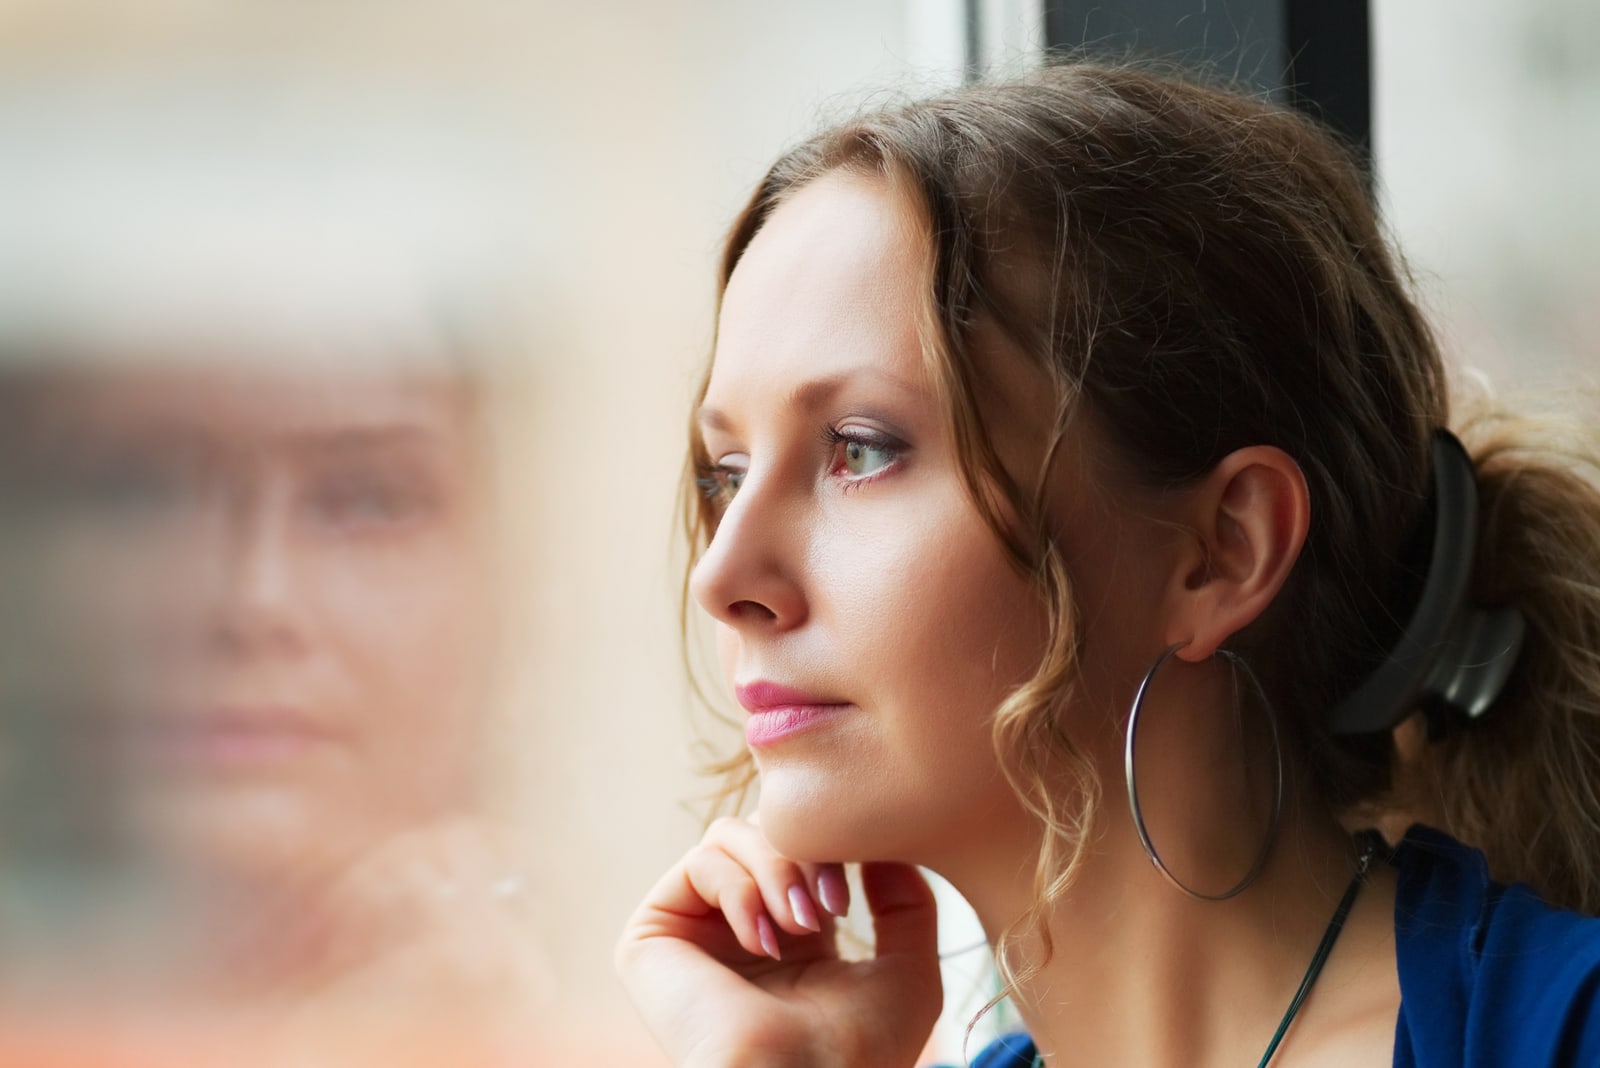 mindful woman looking at distance through window